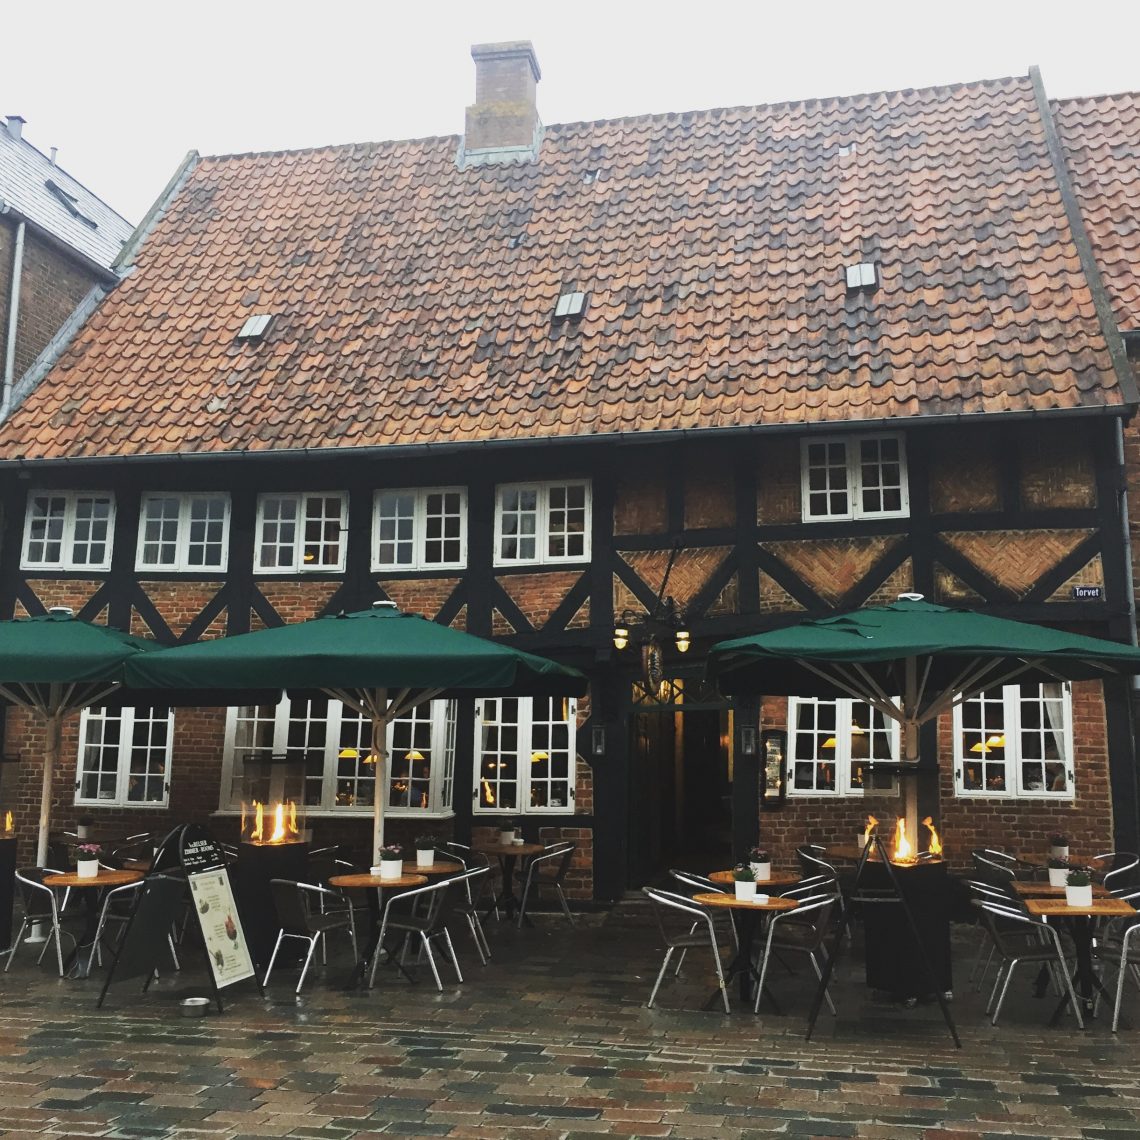 Weiss Stue Restaurant and Hotel on 2 day trip to Ribe, Denmark